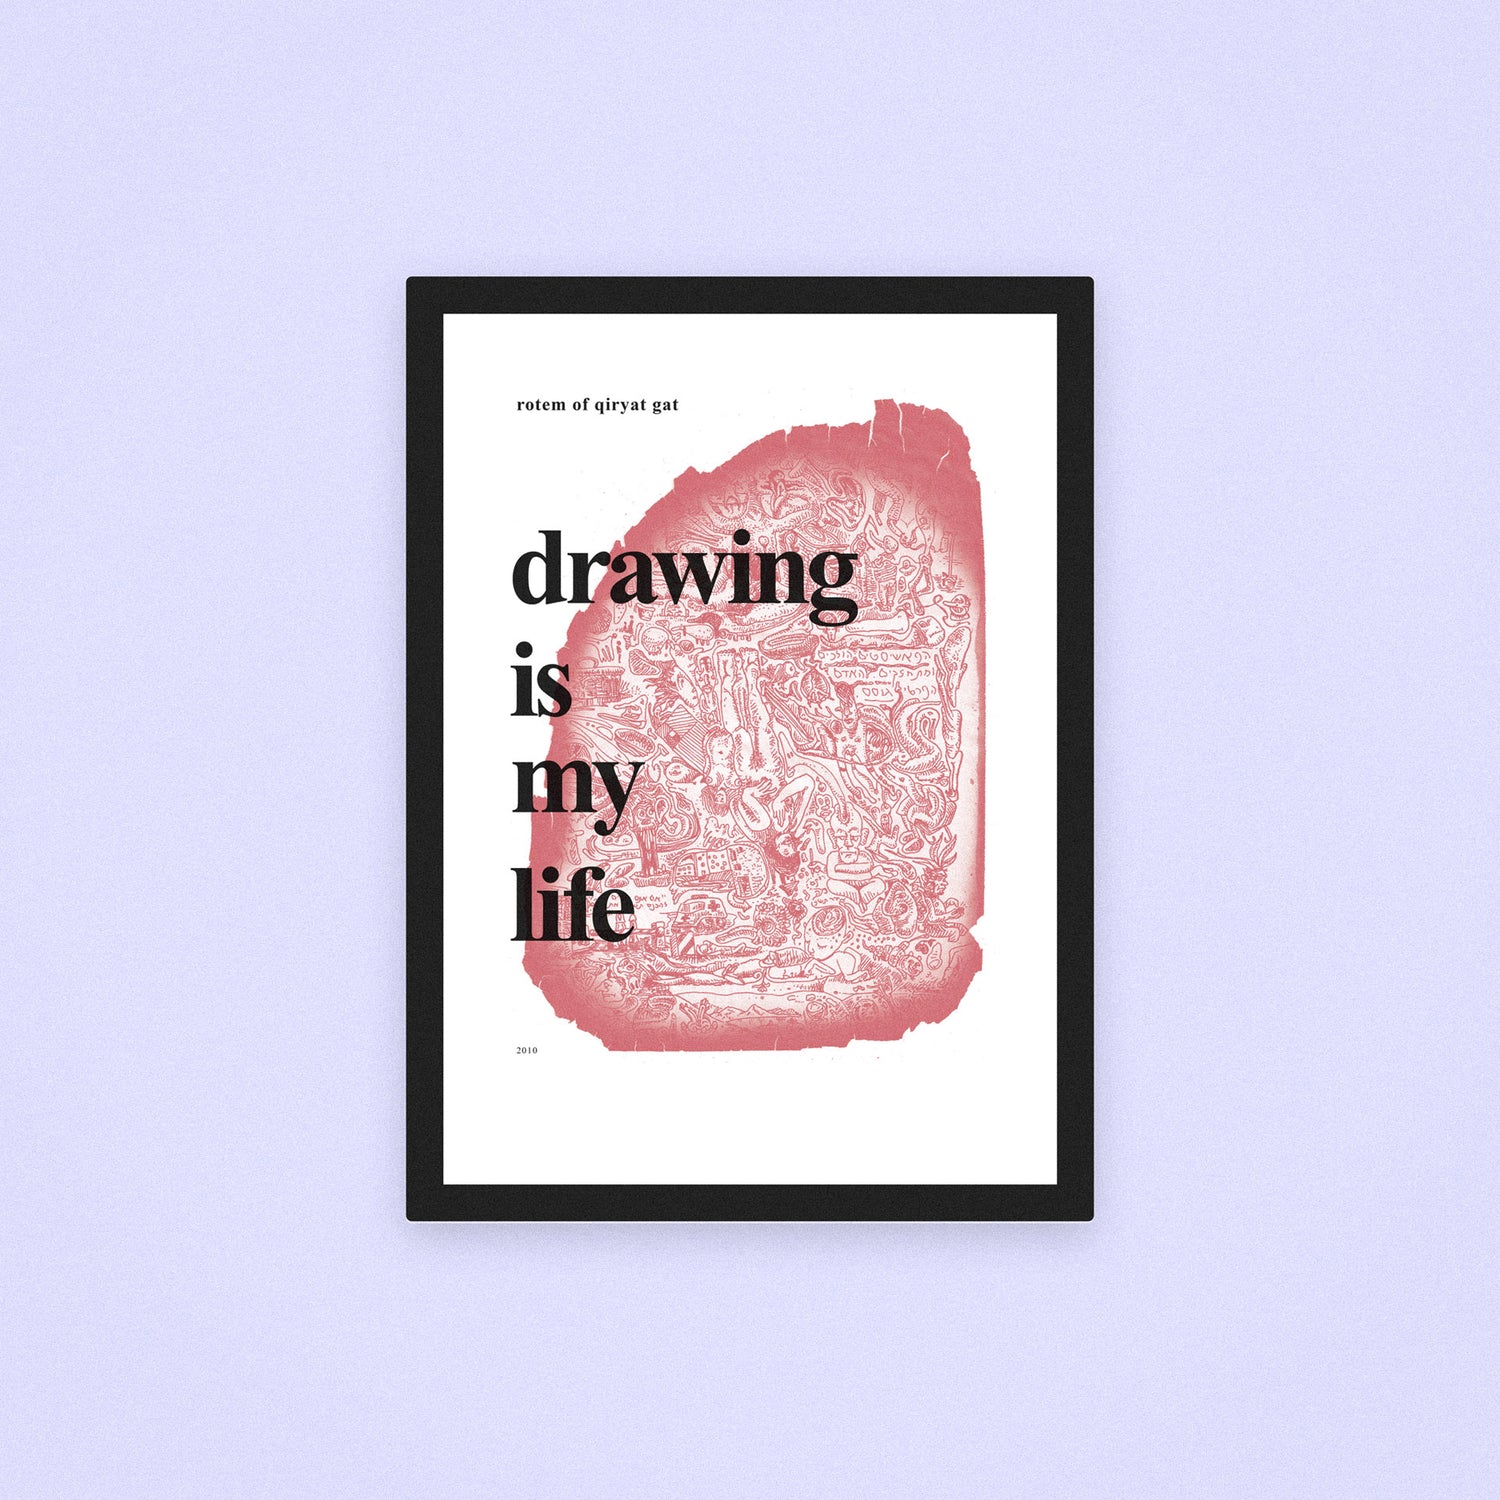 rotem of qiryat gat, DRAWING IS MY LIFE, 2010, limited edition boxed set